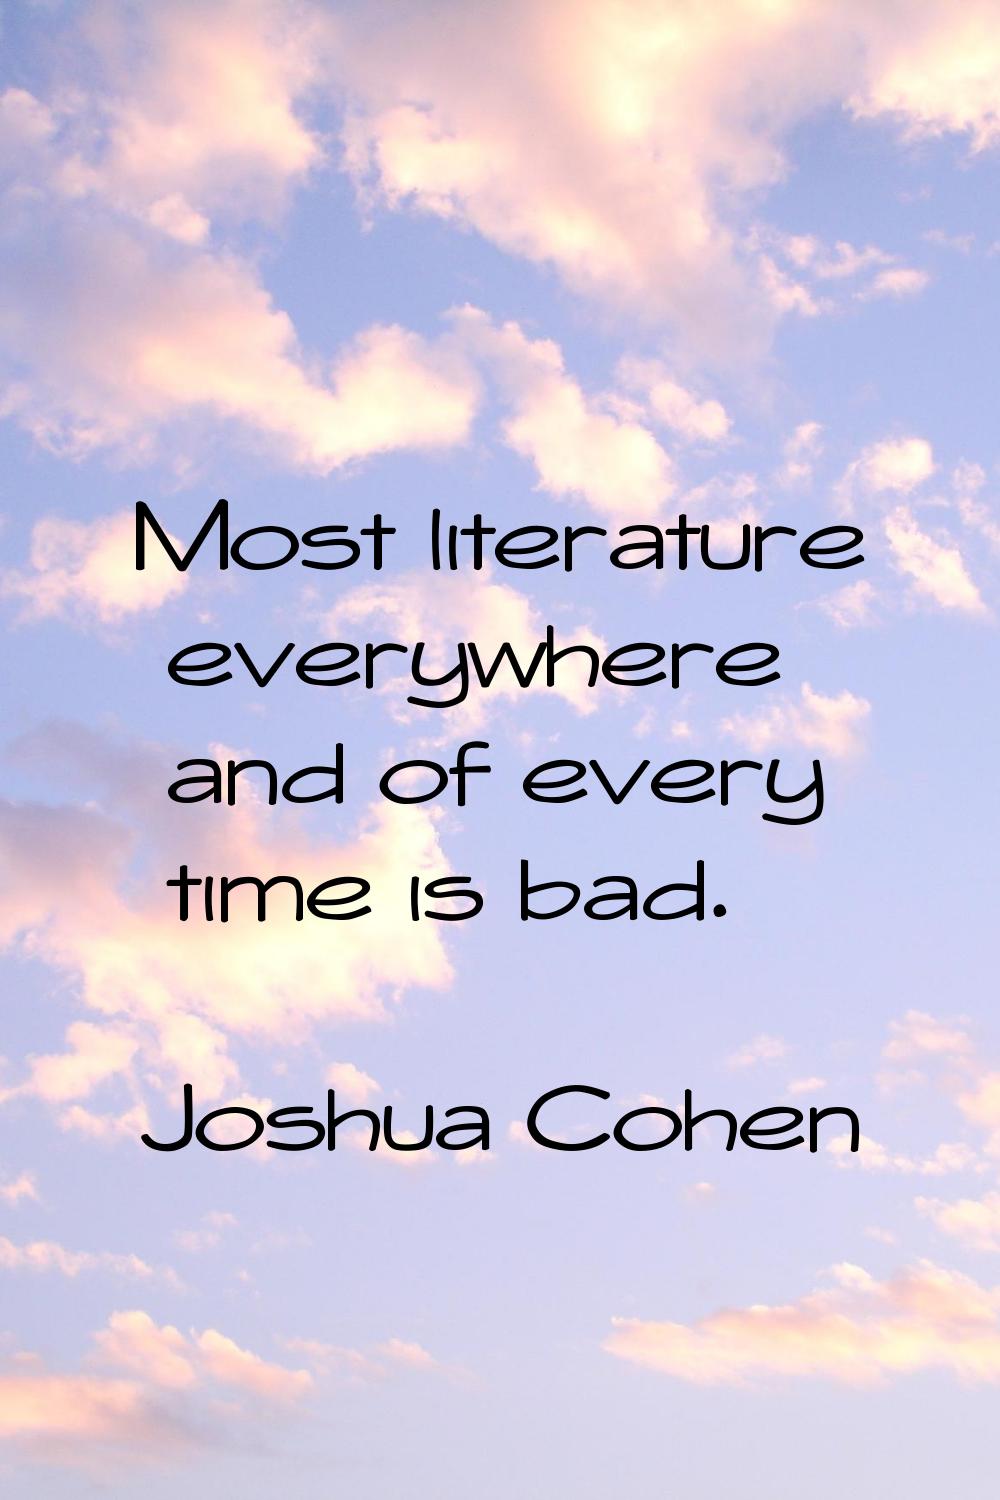 Most literature everywhere and of every time is bad.